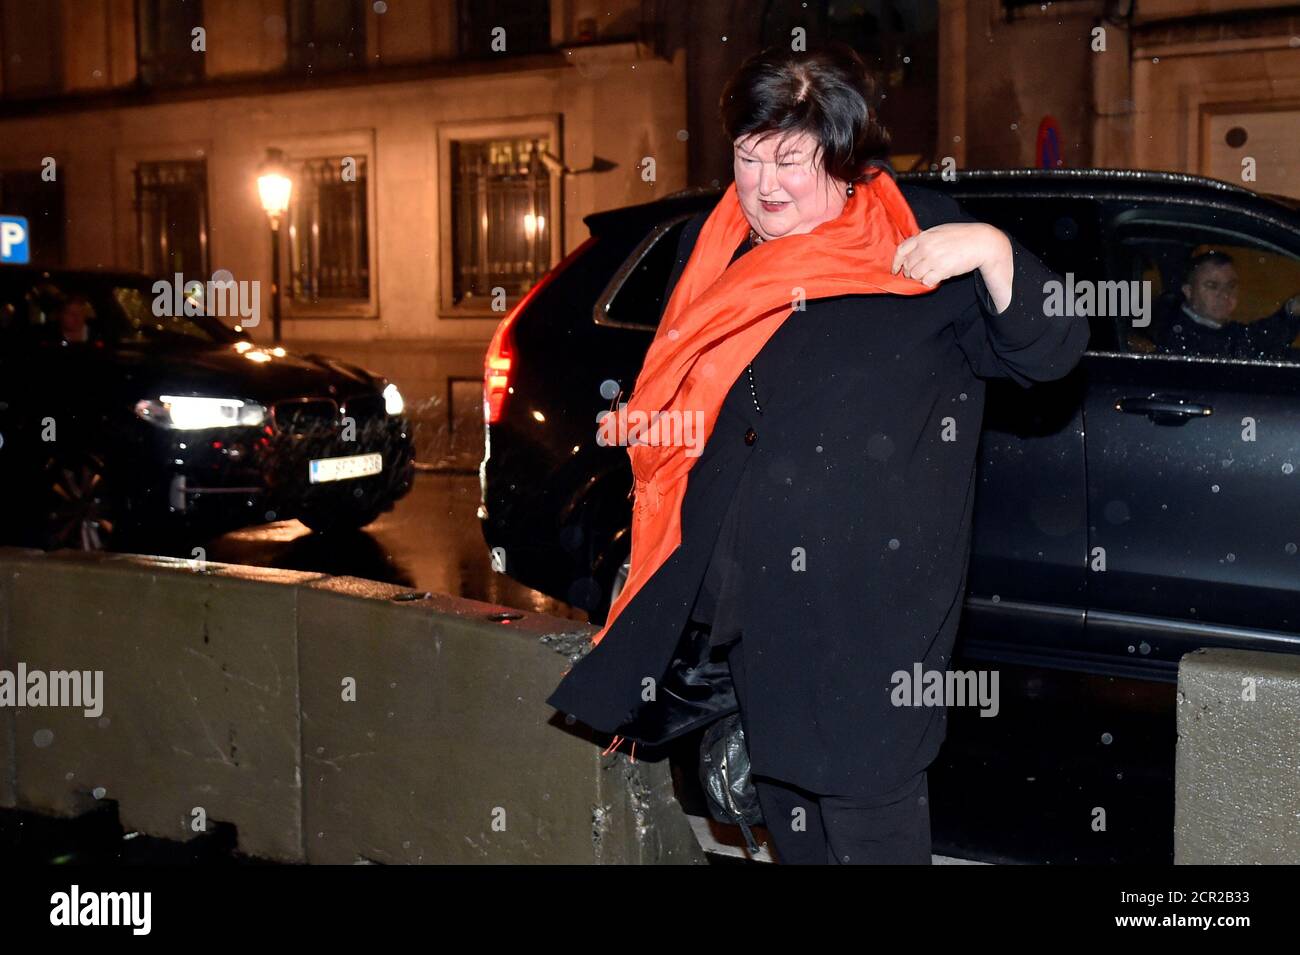 Belgian Health Minister Maggie De Block arrives for a Special Cabinet  meeting about the Marrakesh treaty, in Brussels, Belgium, December 8, 2018.  REUTERS/Eric Vidal Stock Photo - Alamy